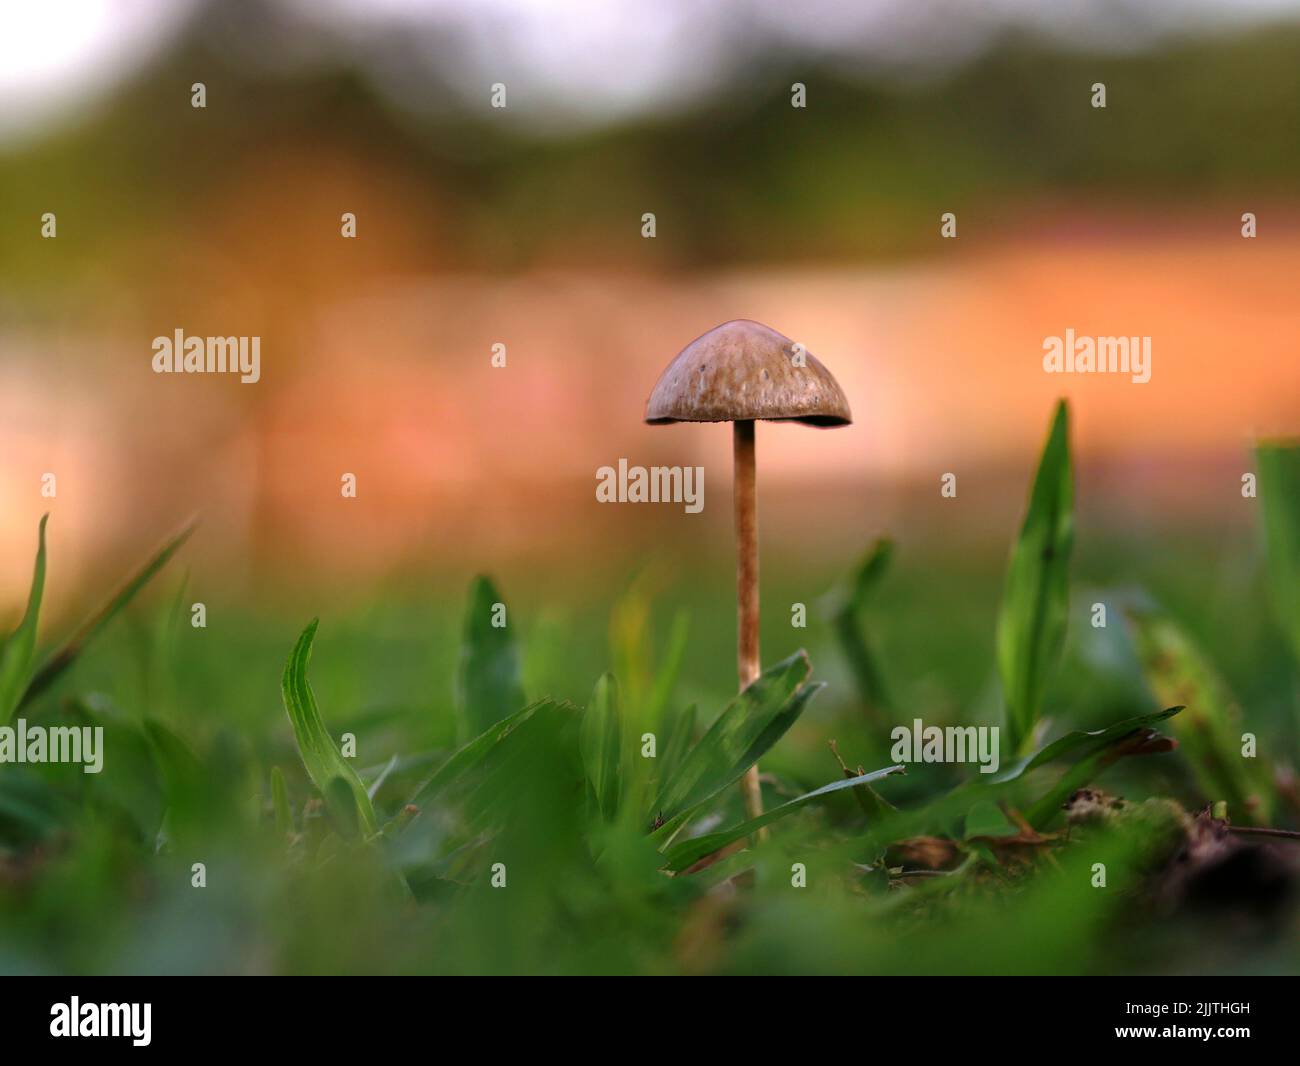 A closeup shot of a small mushroom on the blurry background Stock Photo